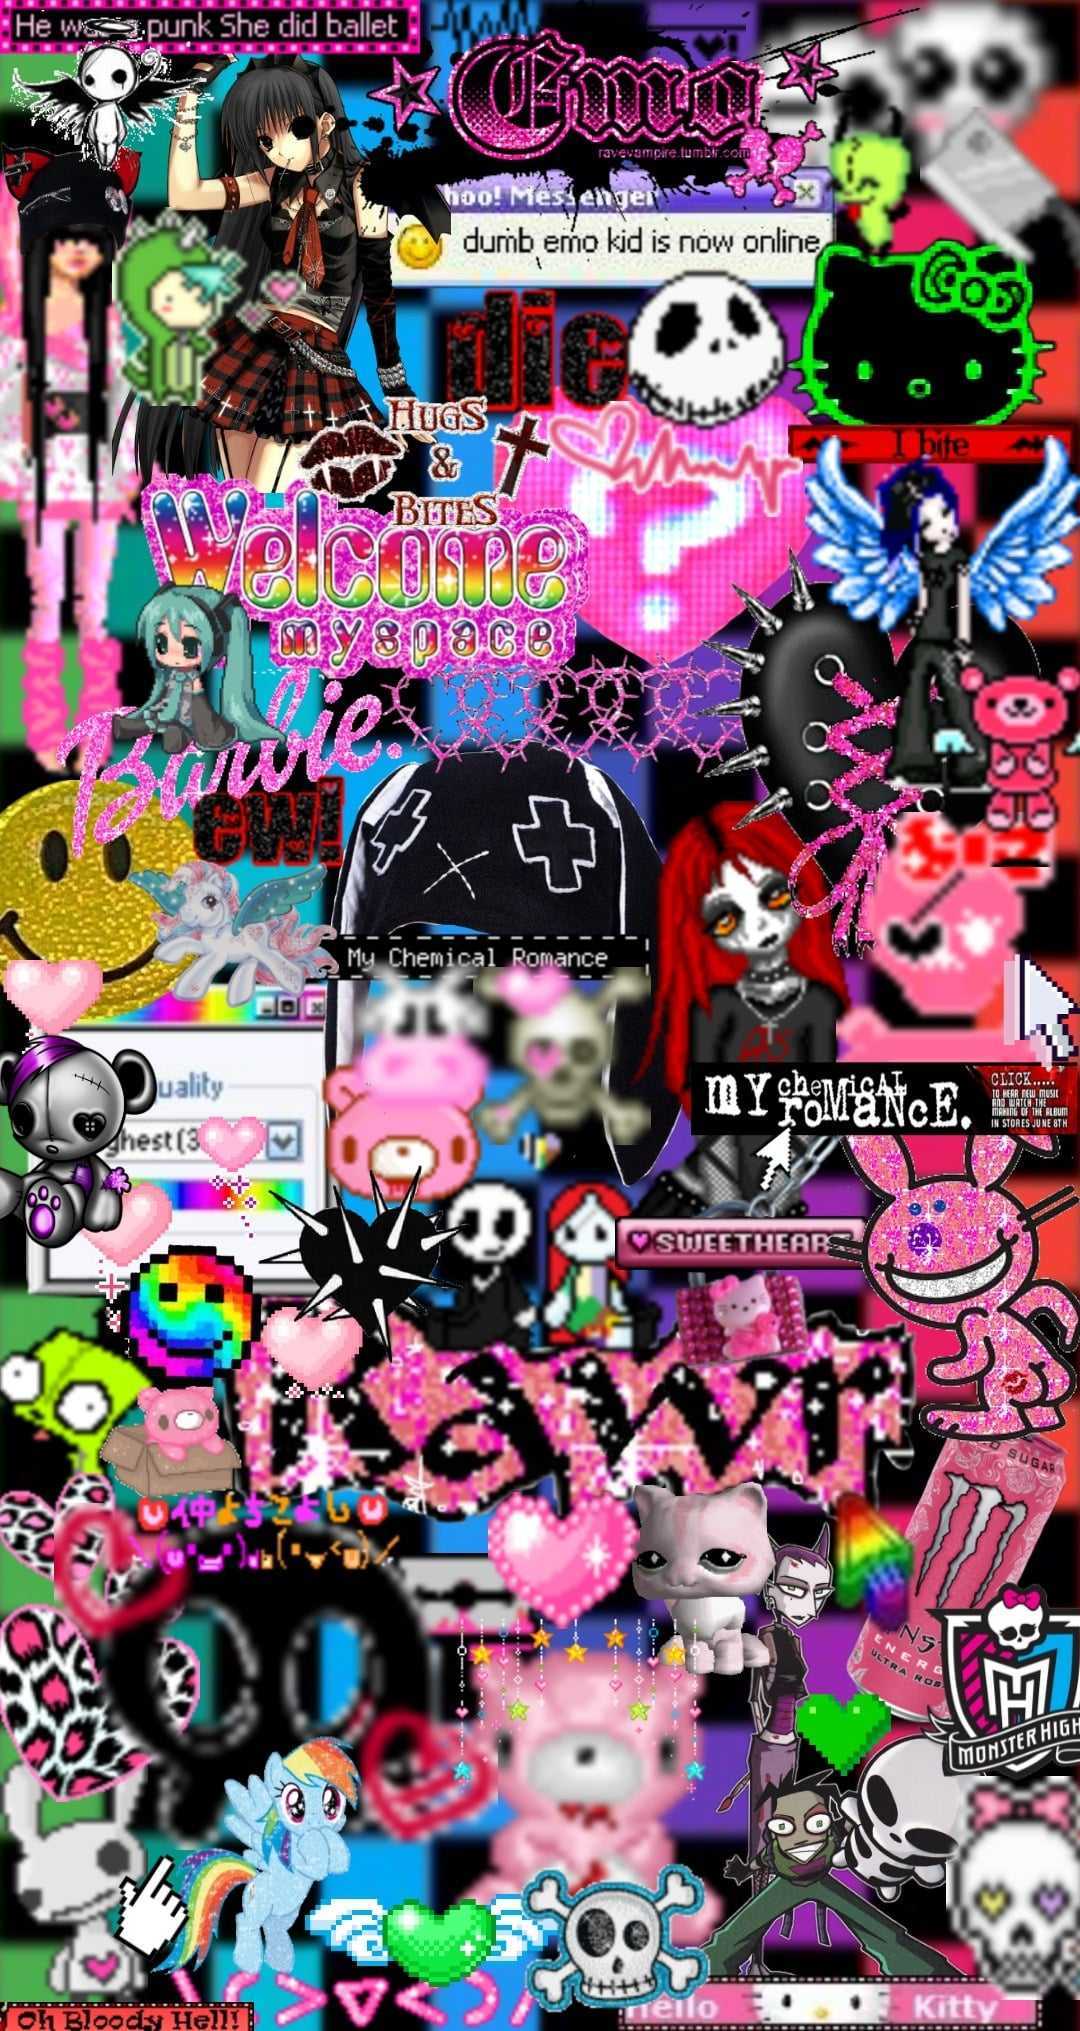 Emo wallpaper by me! If you use it please give credit! - Weirdcore